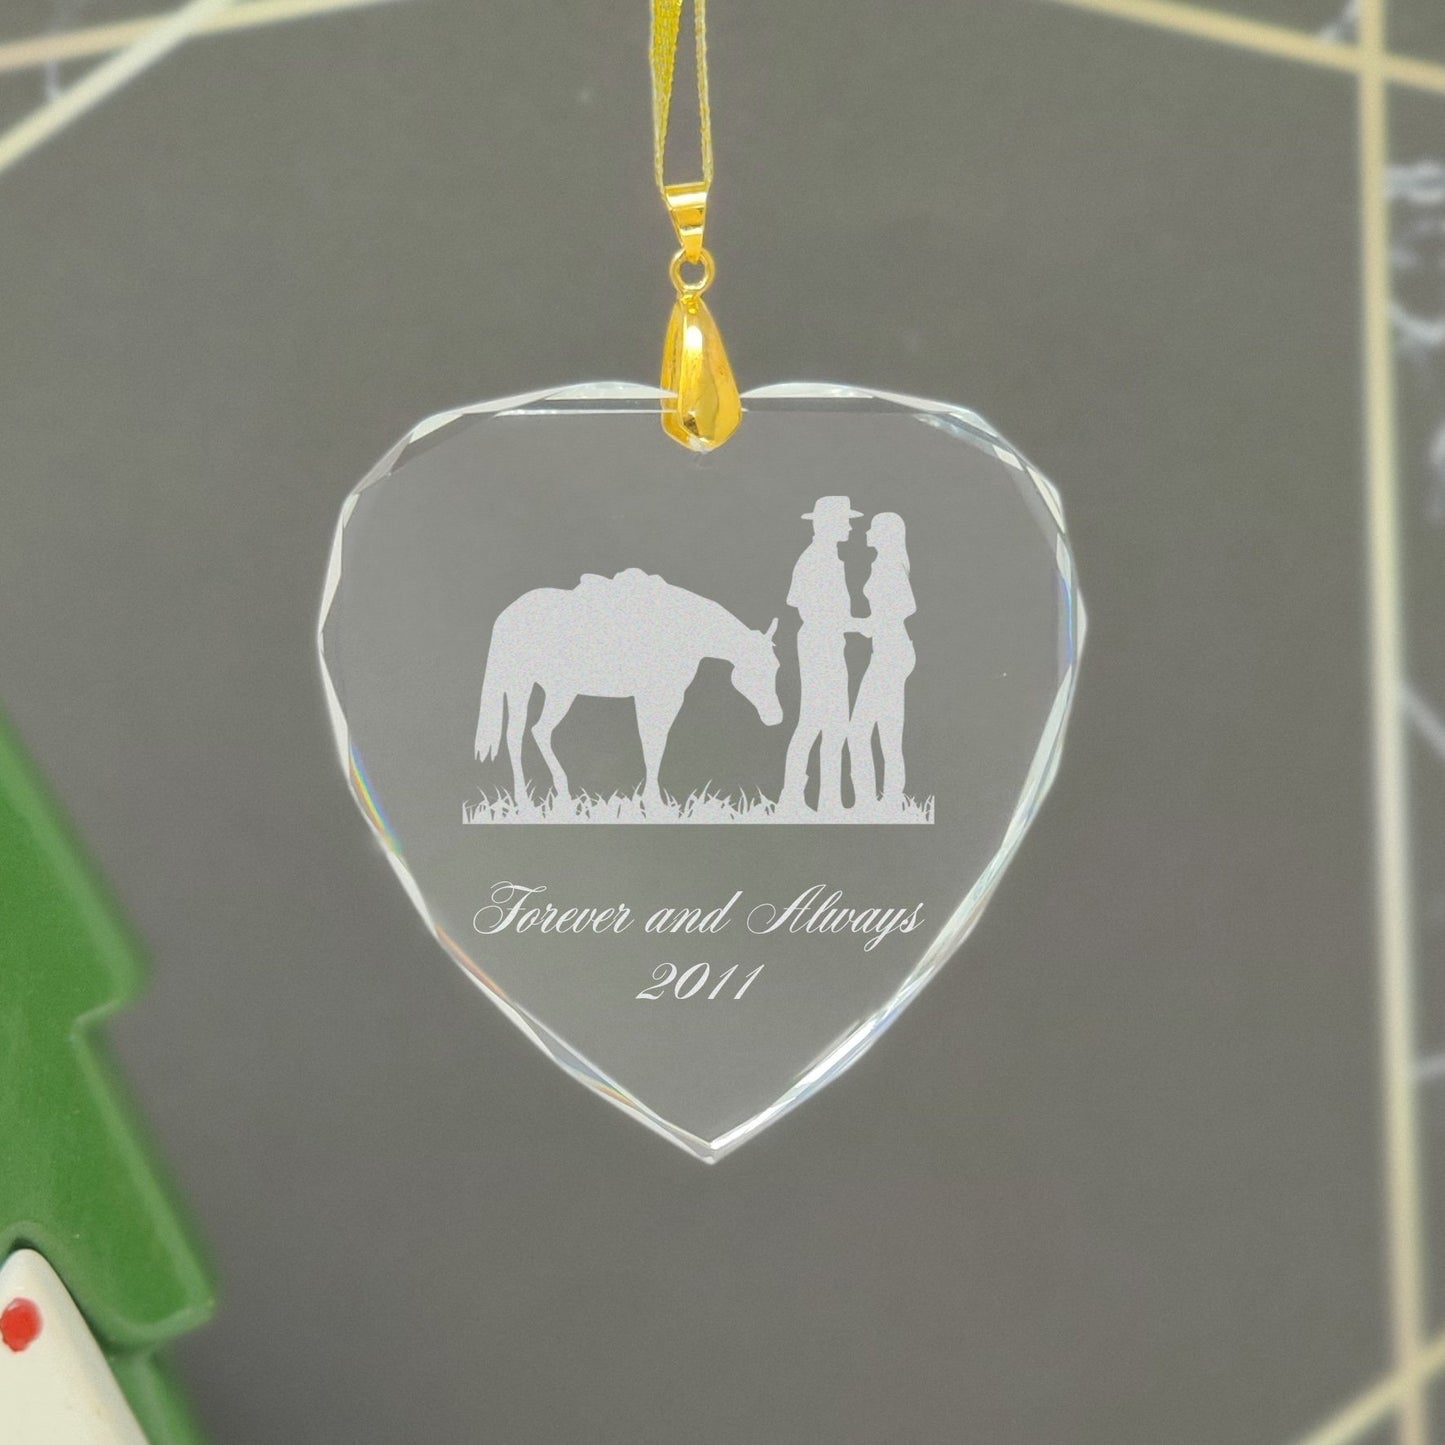 LaserGram Christmas Ornament, Zodiac Sign Aries, Personalized Engraving Included (Heart Shape)